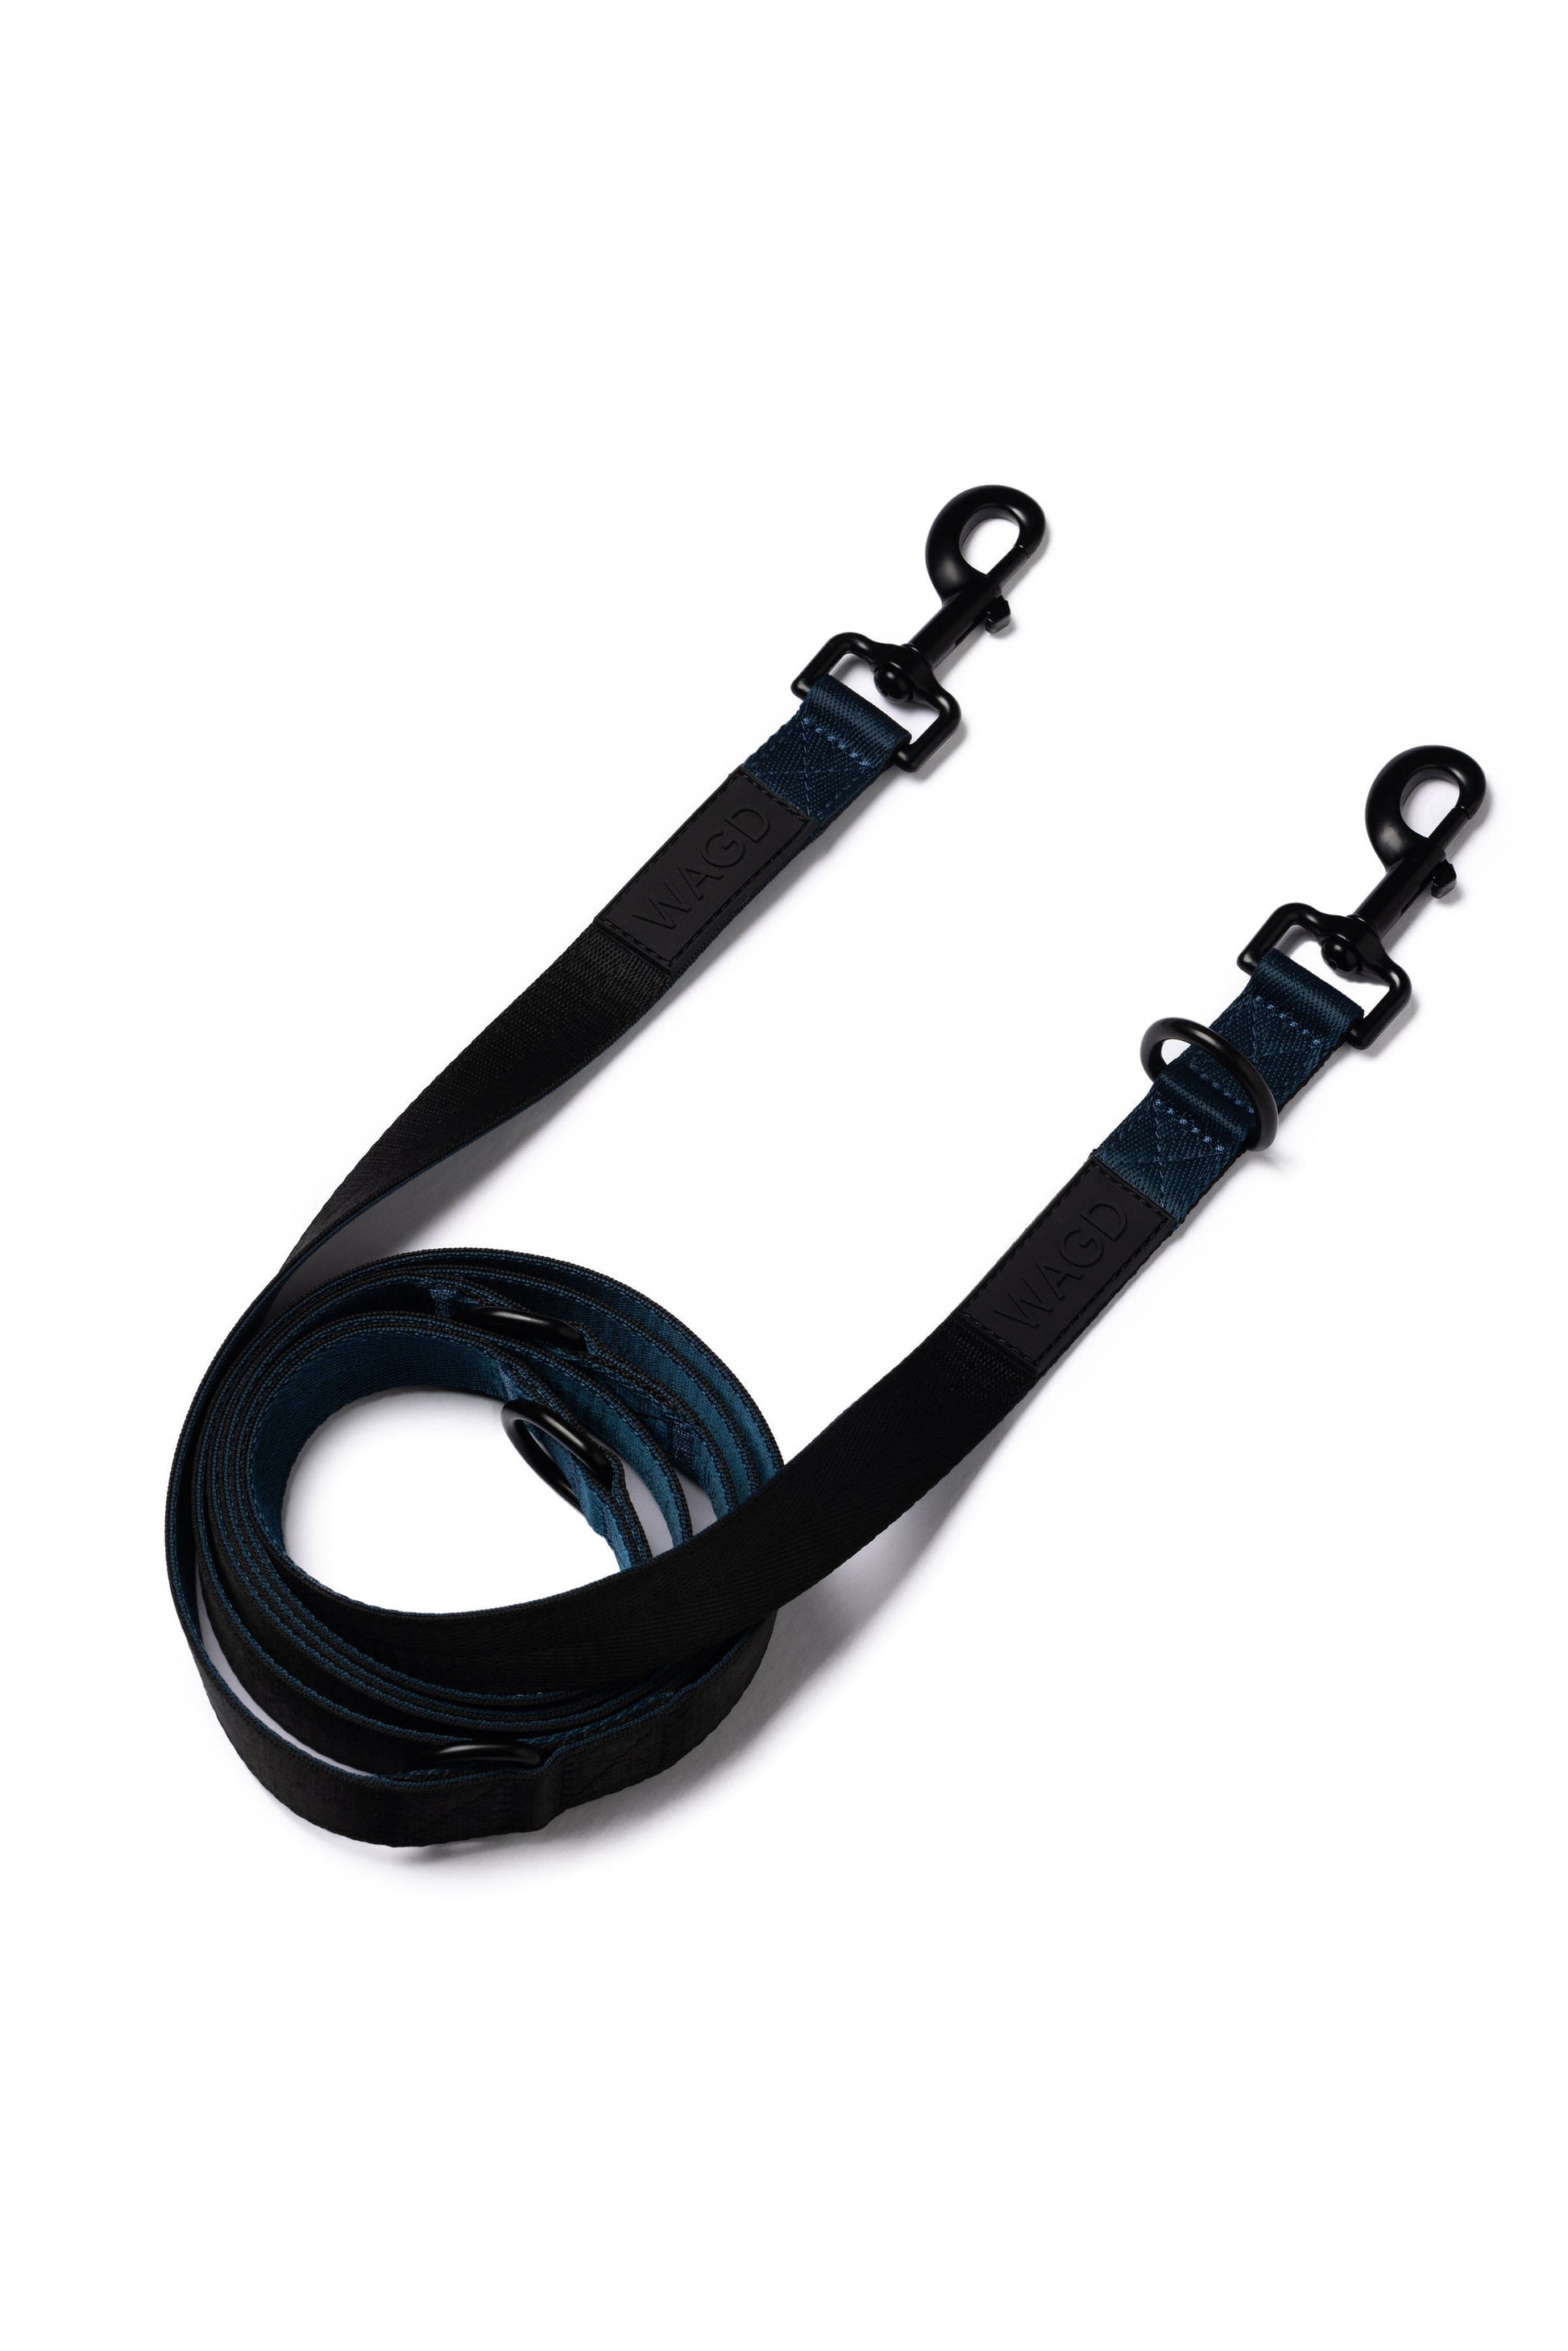 Multi length lead in Black and Peacock with 2 black metal clips at either end and with WAGD rubber logo. 